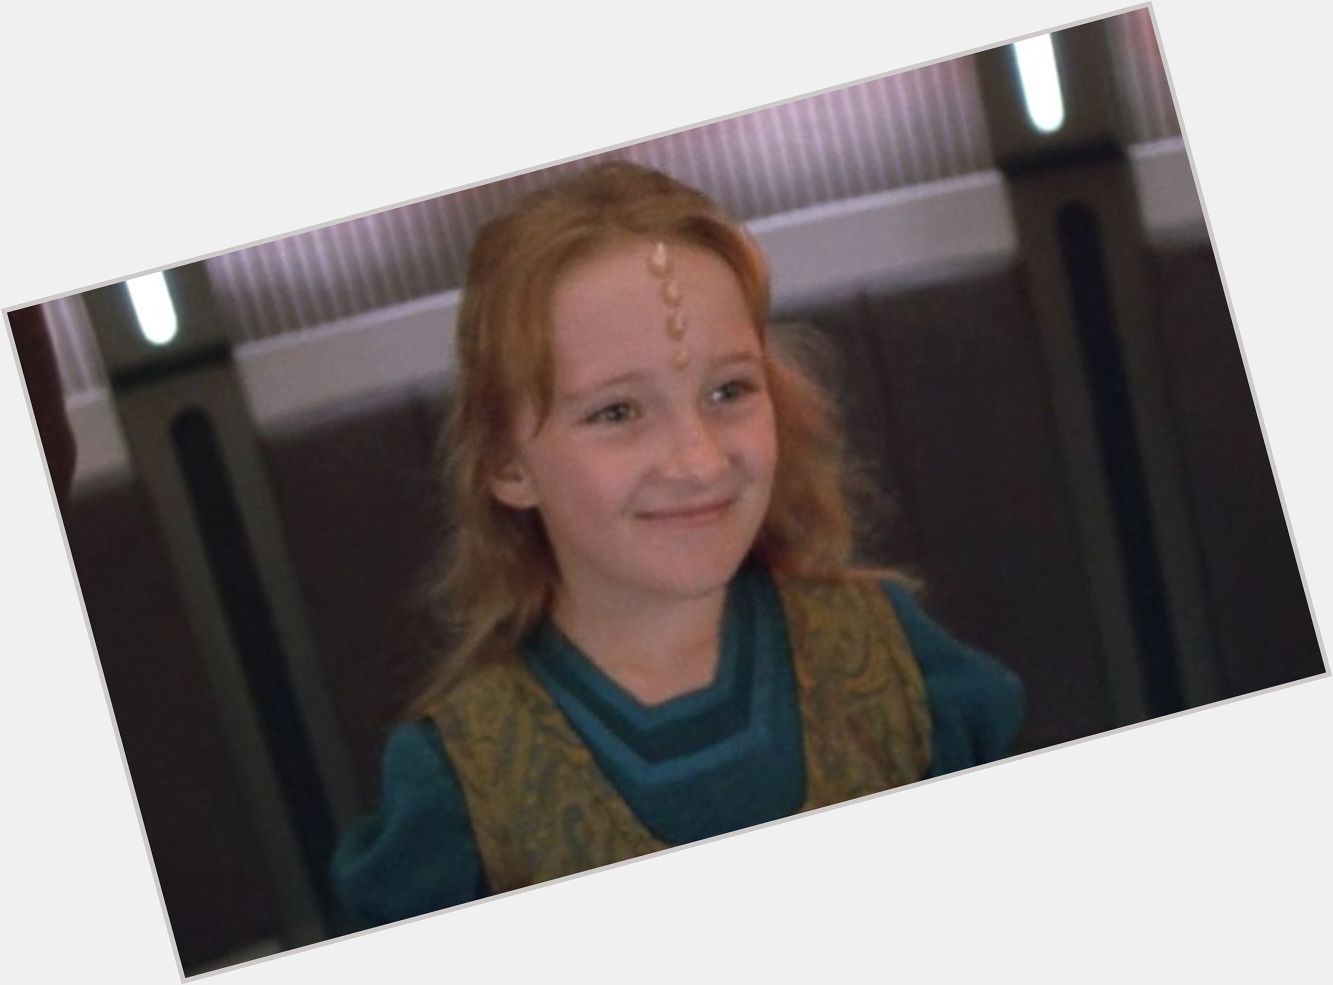 Join us in wishing a very happy birthday to Scarlett Pomers, who played Naomi Wildman on Voyager!   